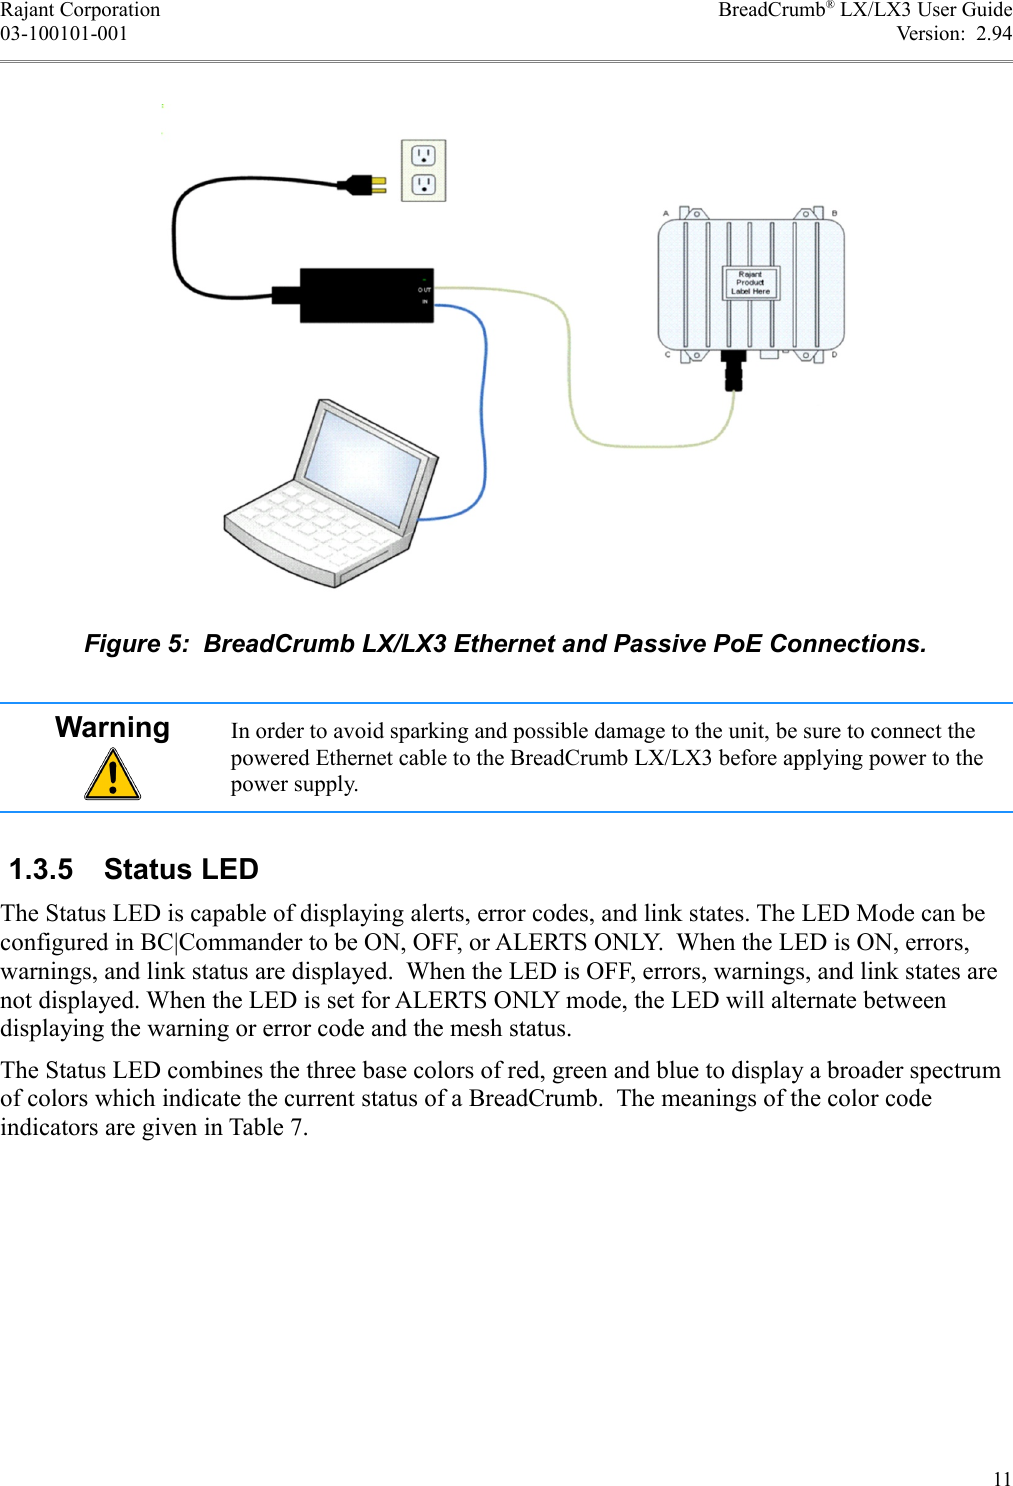 Rajant Corporation BreadCrumb® LX/LX3 User Guide03-100101-001 Version:  2.94- In order to avoid sparking and possible damage to the unit, be sure to connect the powered Ethernet cable to the BreadCrumb LX/LX3 before applying power to the power supply.(&amp;&amp;, 5The Status LED is capable of displaying alerts, error codes, and link states. The LED Mode can be configured in BC|Commander to be ON, OFF, or ALERTS ONLY.  When the LED is ON, errors, warnings, and link status are displayed.  When the LED is OFF, errors, warnings, and link states are not displayed. When the LED is set for ALERTS ONLY mode, the LED will alternate between displaying the warning or error code and the mesh status.The Status LED combines the three base colors of red, green and blue to display a broader spectrum of colors which indicate the current status of a BreadCrumb.  The meanings of the color code indicators are given in Table 7.11Figure 5:  BreadCrumb LX/LX3 Ethernet and Passive PoE Connections.